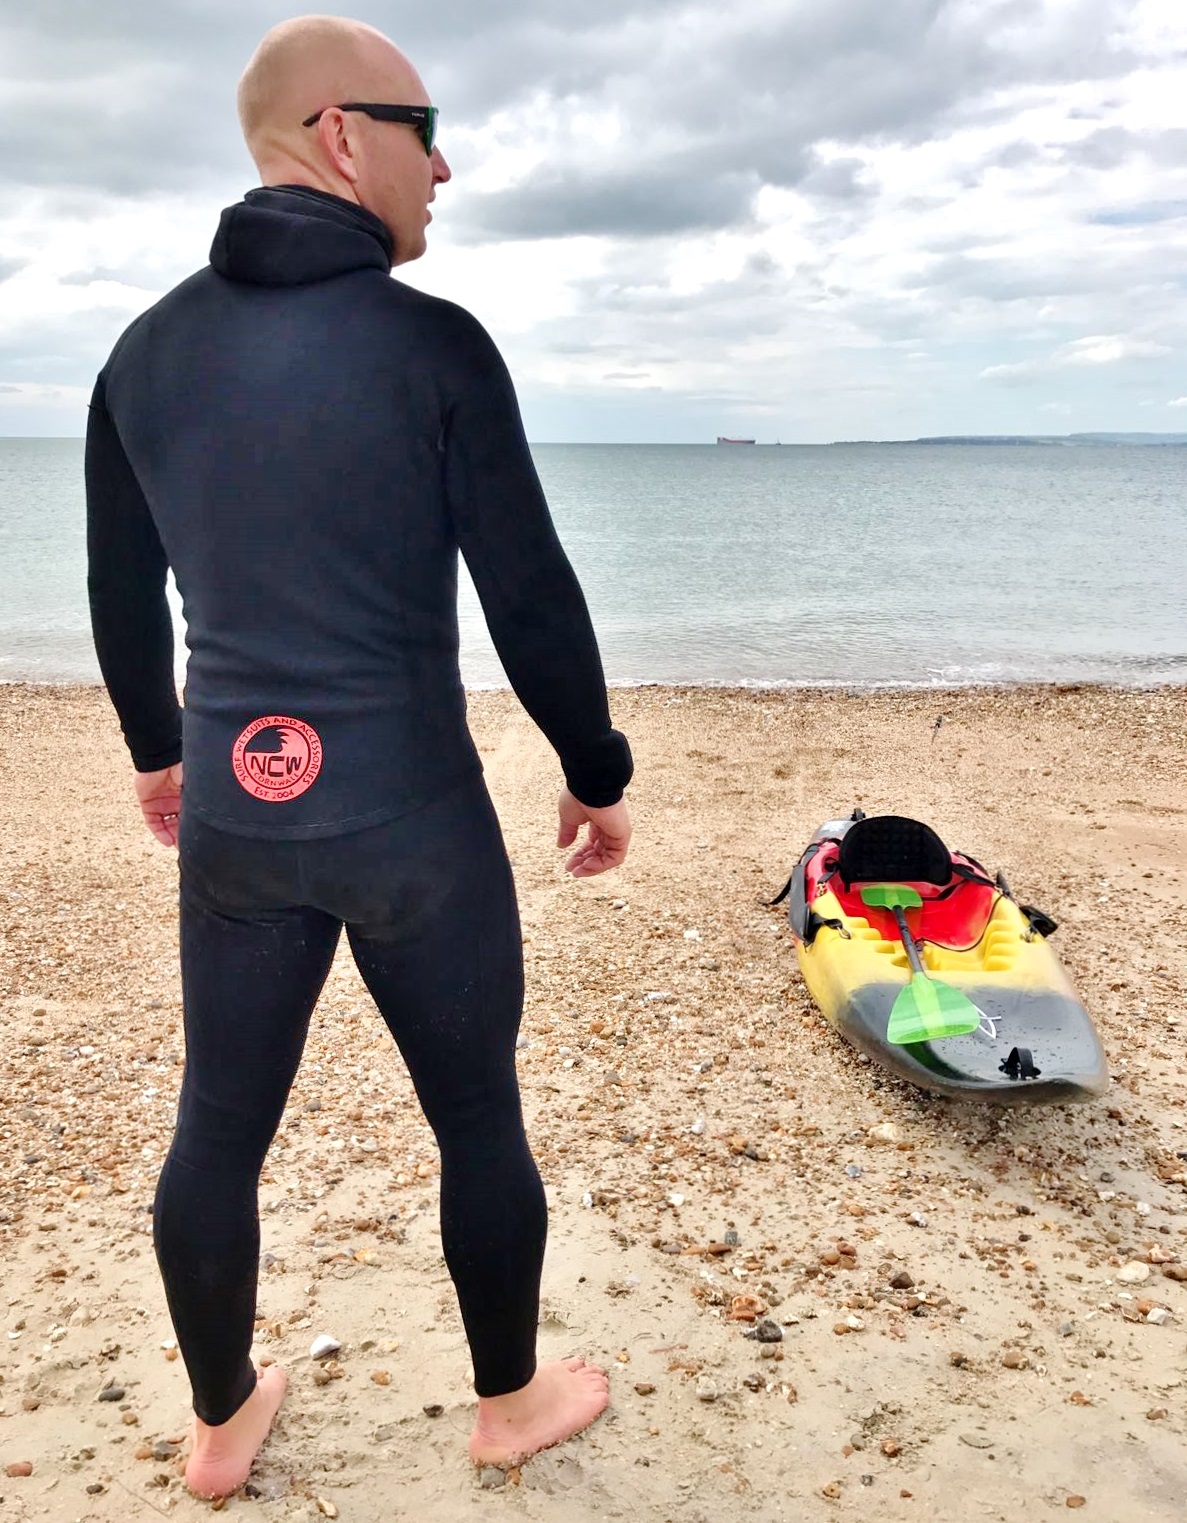 https://www.northcoastwetsuits.co.uk/wp-content/uploads/2017/08/sea-strides-rear2.jpg